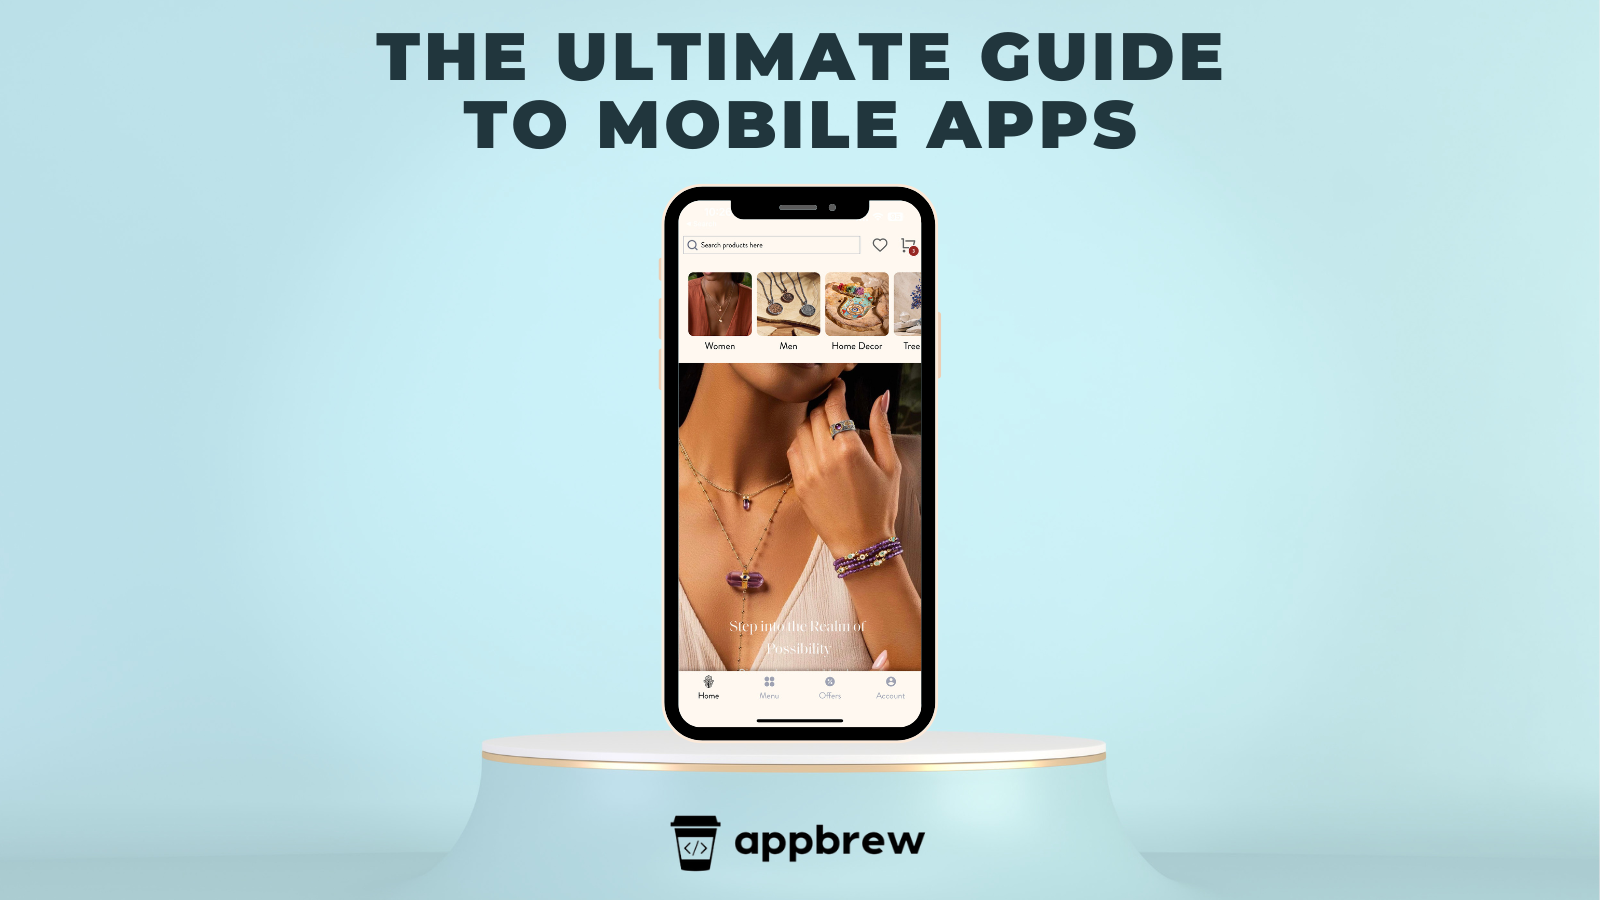 The Ultimate Guide to Mobile Apps